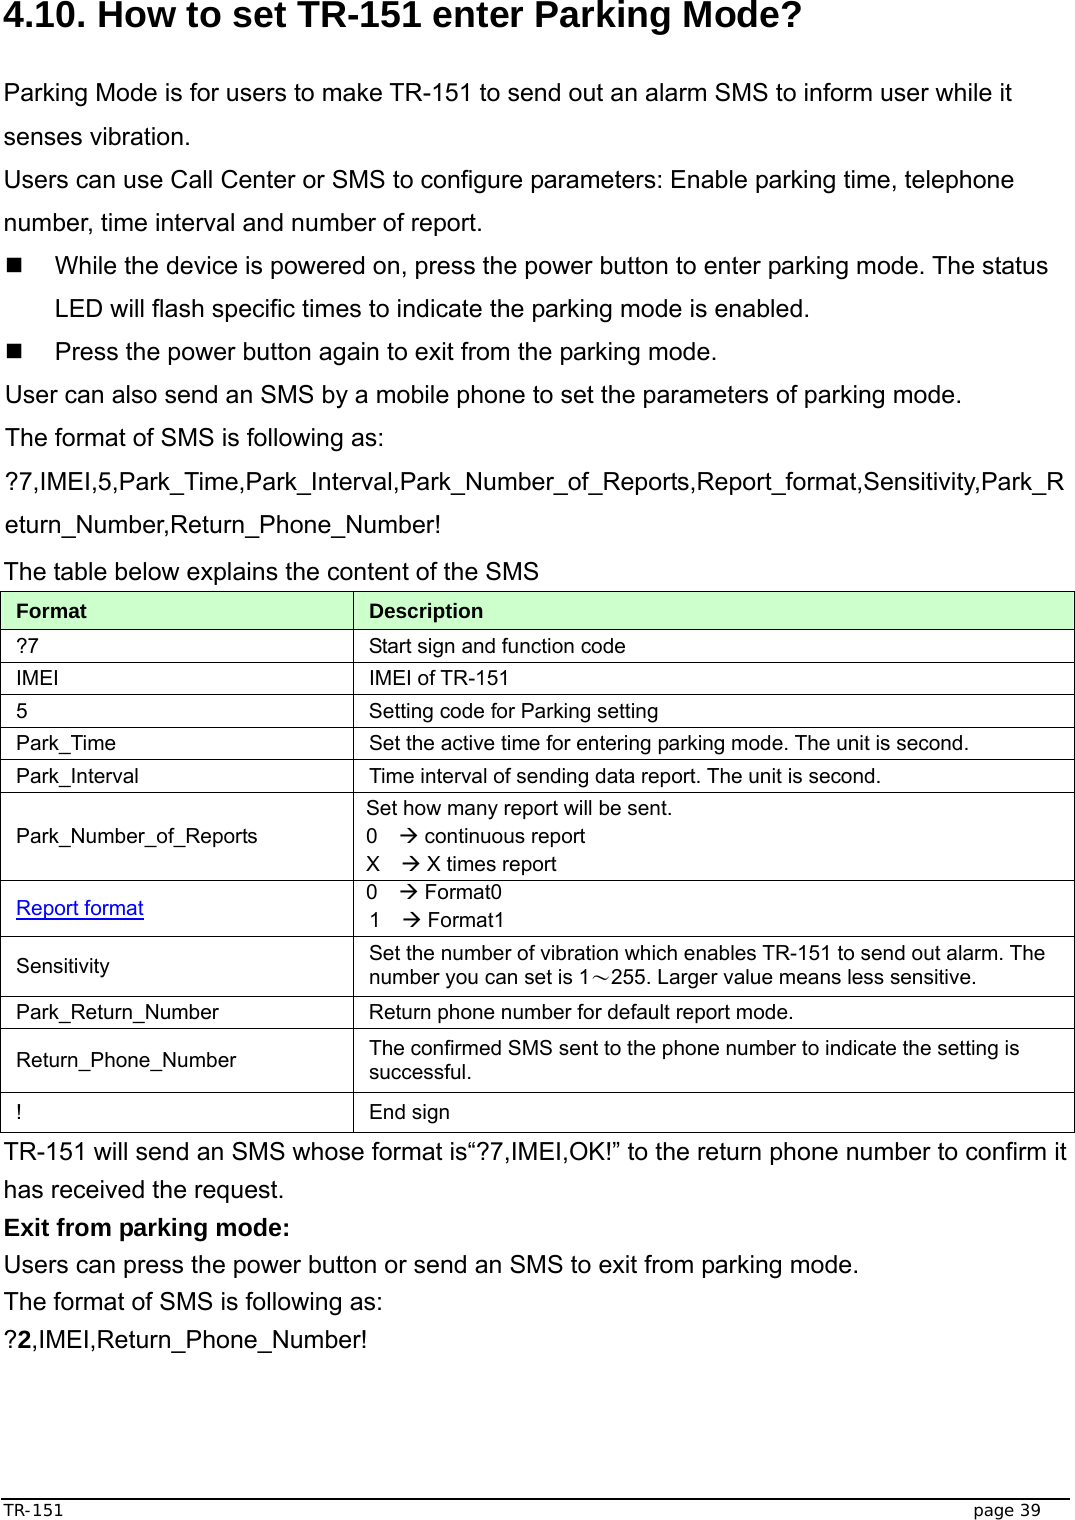  TR-151   page 39  4.10. How to set TR-151 enter Parking Mode?  Parking Mode is for users to make TR-151 to send out an alarm SMS to inform user while it senses vibration. Users can use Call Center or SMS to configure parameters: Enable parking time, telephone number, time interval and number of report.   While the device is powered on, press the power button to enter parking mode. The status LED will flash specific times to indicate the parking mode is enabled.   Press the power button again to exit from the parking mode.   User can also send an SMS by a mobile phone to set the parameters of parking mode. The format of SMS is following as: ?7,IMEI,5,Park_Time,Park_Interval,Park_Number_of_Reports,Report_format,Sensitivity,Park_Return_Number,Return_Phone_Number! The table below explains the content of the SMS Format  Description ?7  Start sign and function code IMEI IMEI of TR-151 5  Setting code for Parking setting Park_Time  Set the active time for entering parking mode. The unit is second. Park_Interval  Time interval of sending data report. The unit is second. Park_Number_of_Reports Set how many report will be sent. 0  Æ continuous report X  Æ X times report Report format 0  Æ Format0 1  Æ Format1 Sensitivity  Set the number of vibration which enables TR-151 to send out alarm. The number you can set is 1～255. Larger value means less sensitive. Park_Return_Number  Return phone number for default report mode. Return_Phone_Number  The confirmed SMS sent to the phone number to indicate the setting is successful. ! End sign TR-151 will send an SMS whose format is“?7,IMEI,OK!” to the return phone number to confirm it has received the request.   Exit from parking mode: Users can press the power button or send an SMS to exit from parking mode. The format of SMS is following as: ?2,IMEI,Return_Phone_Number!   